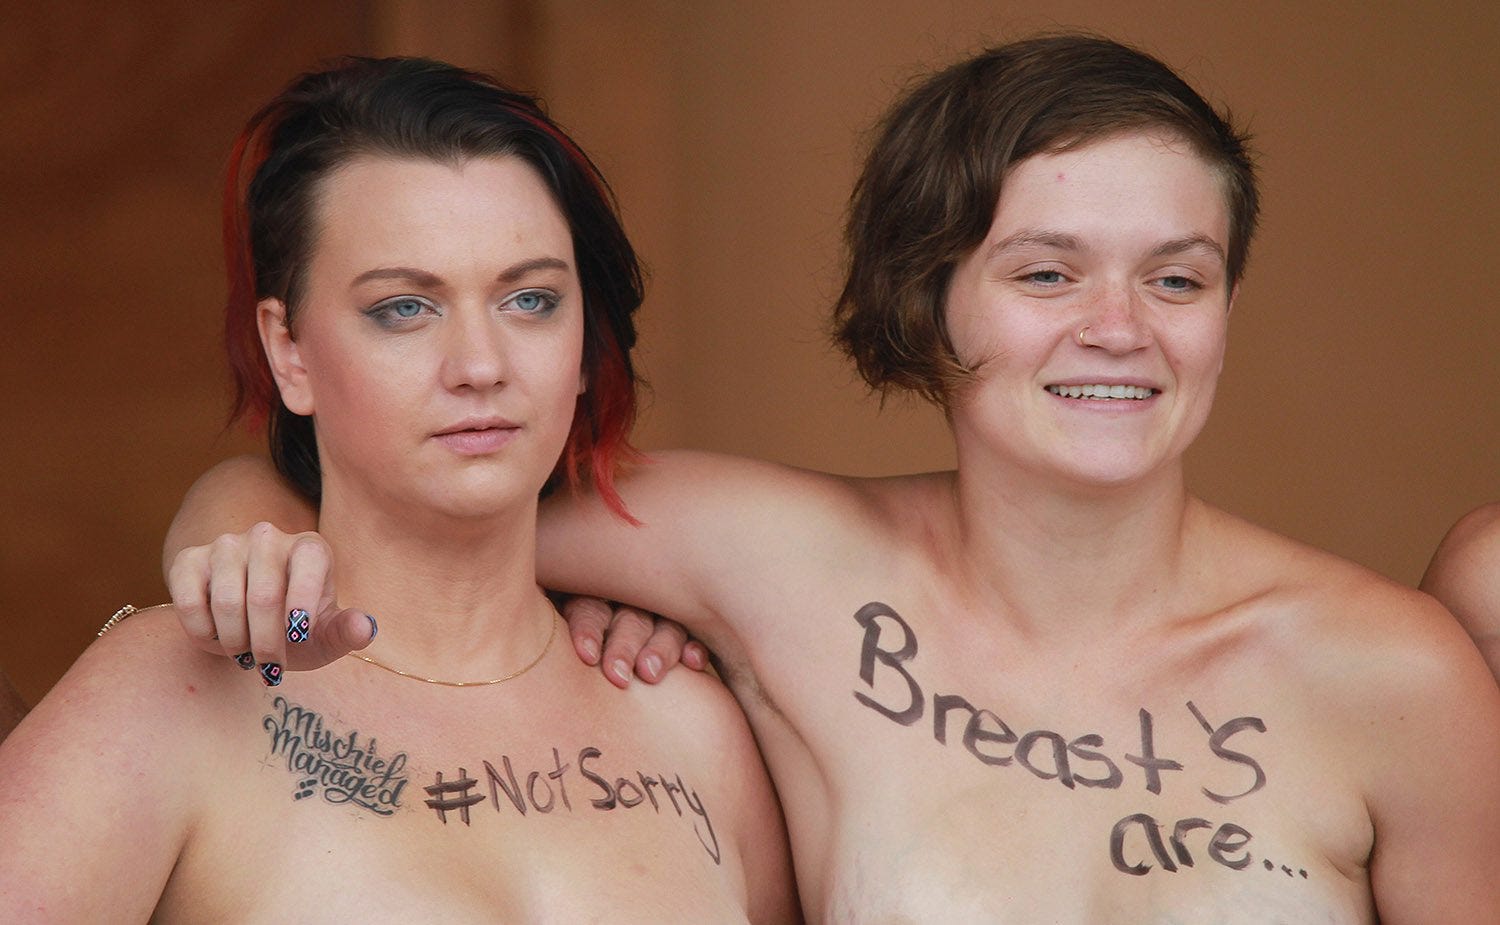 brandon penrose recommends women showing their breasts pic